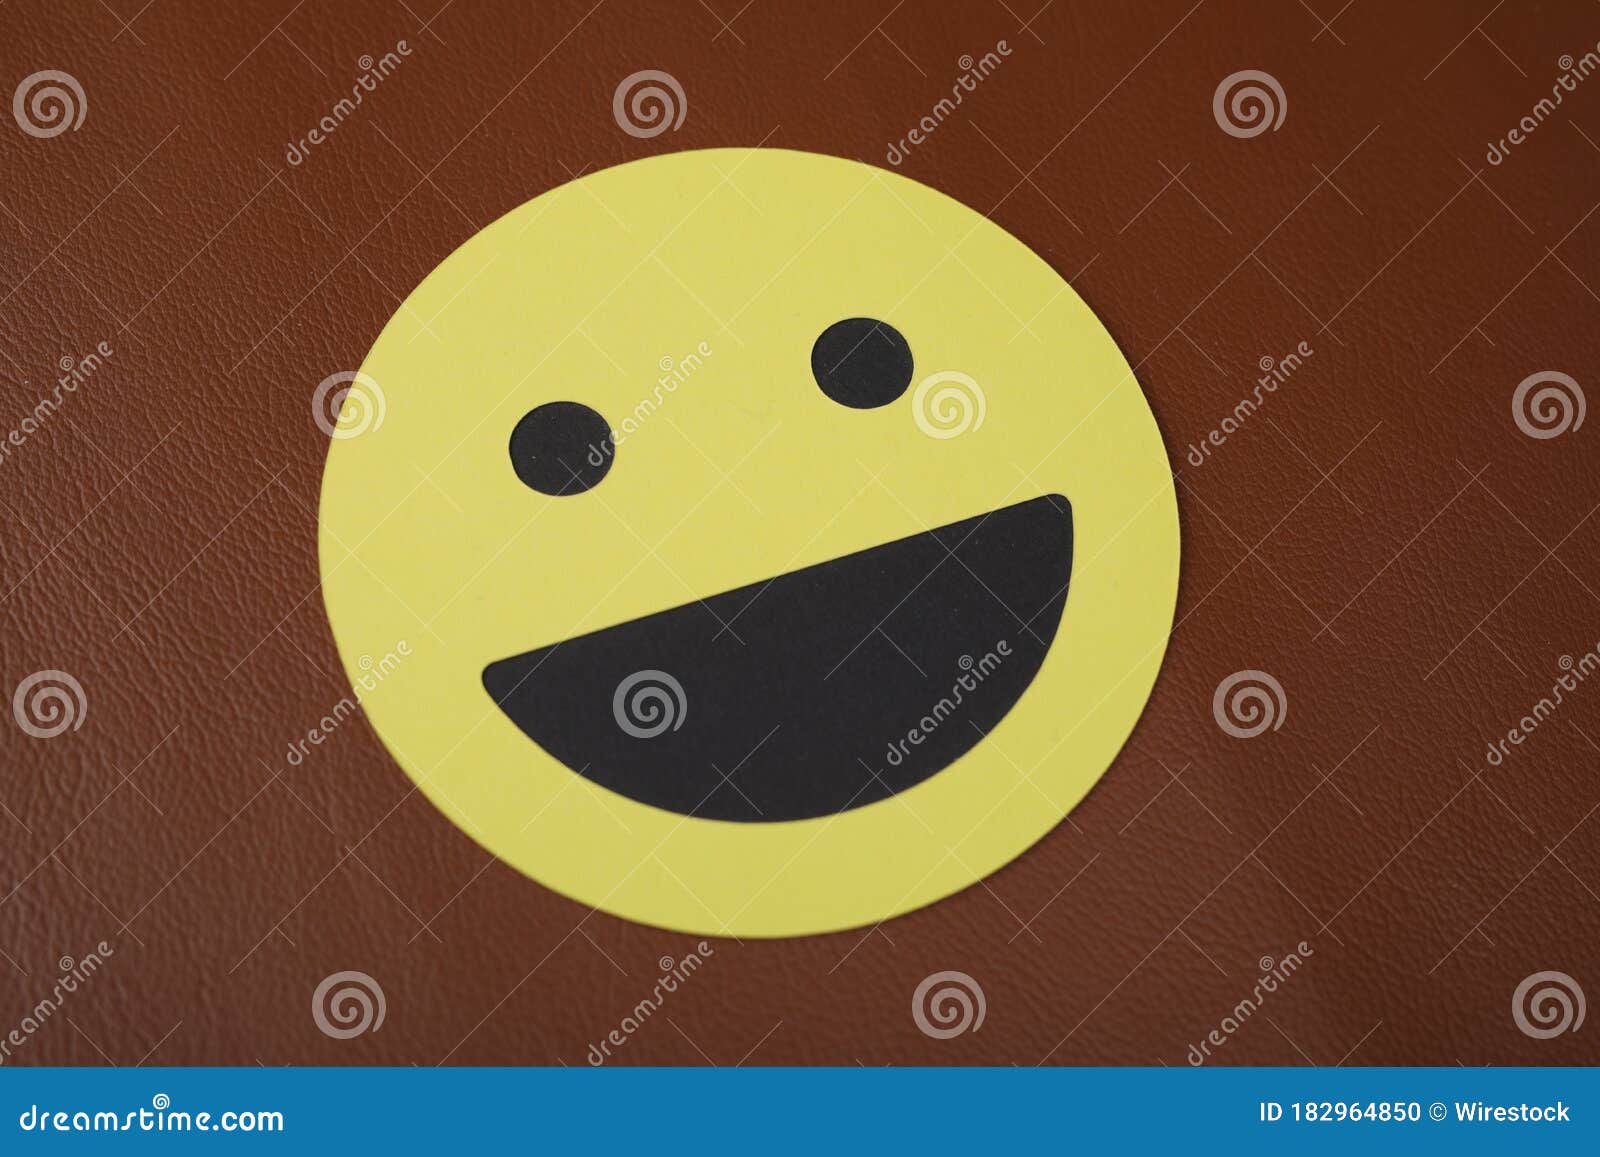 Closeup Shot of a Laughing Smiley Face Sign on a Brown Background ...